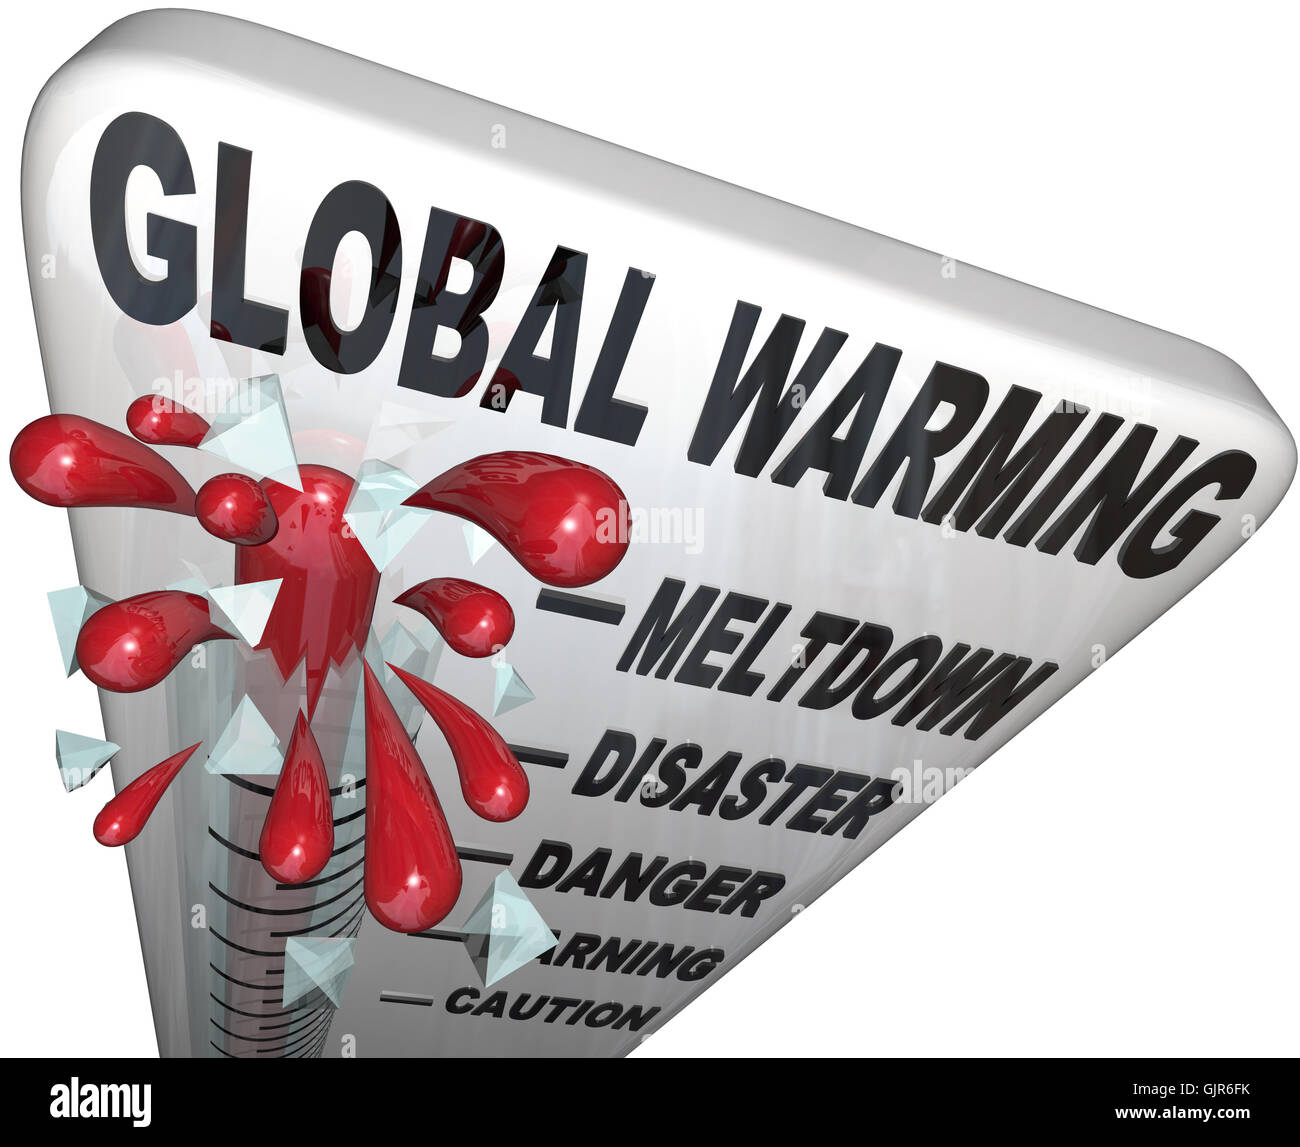 Global Warming Thermometer Shows Rise in World Temperatures Stock Photo